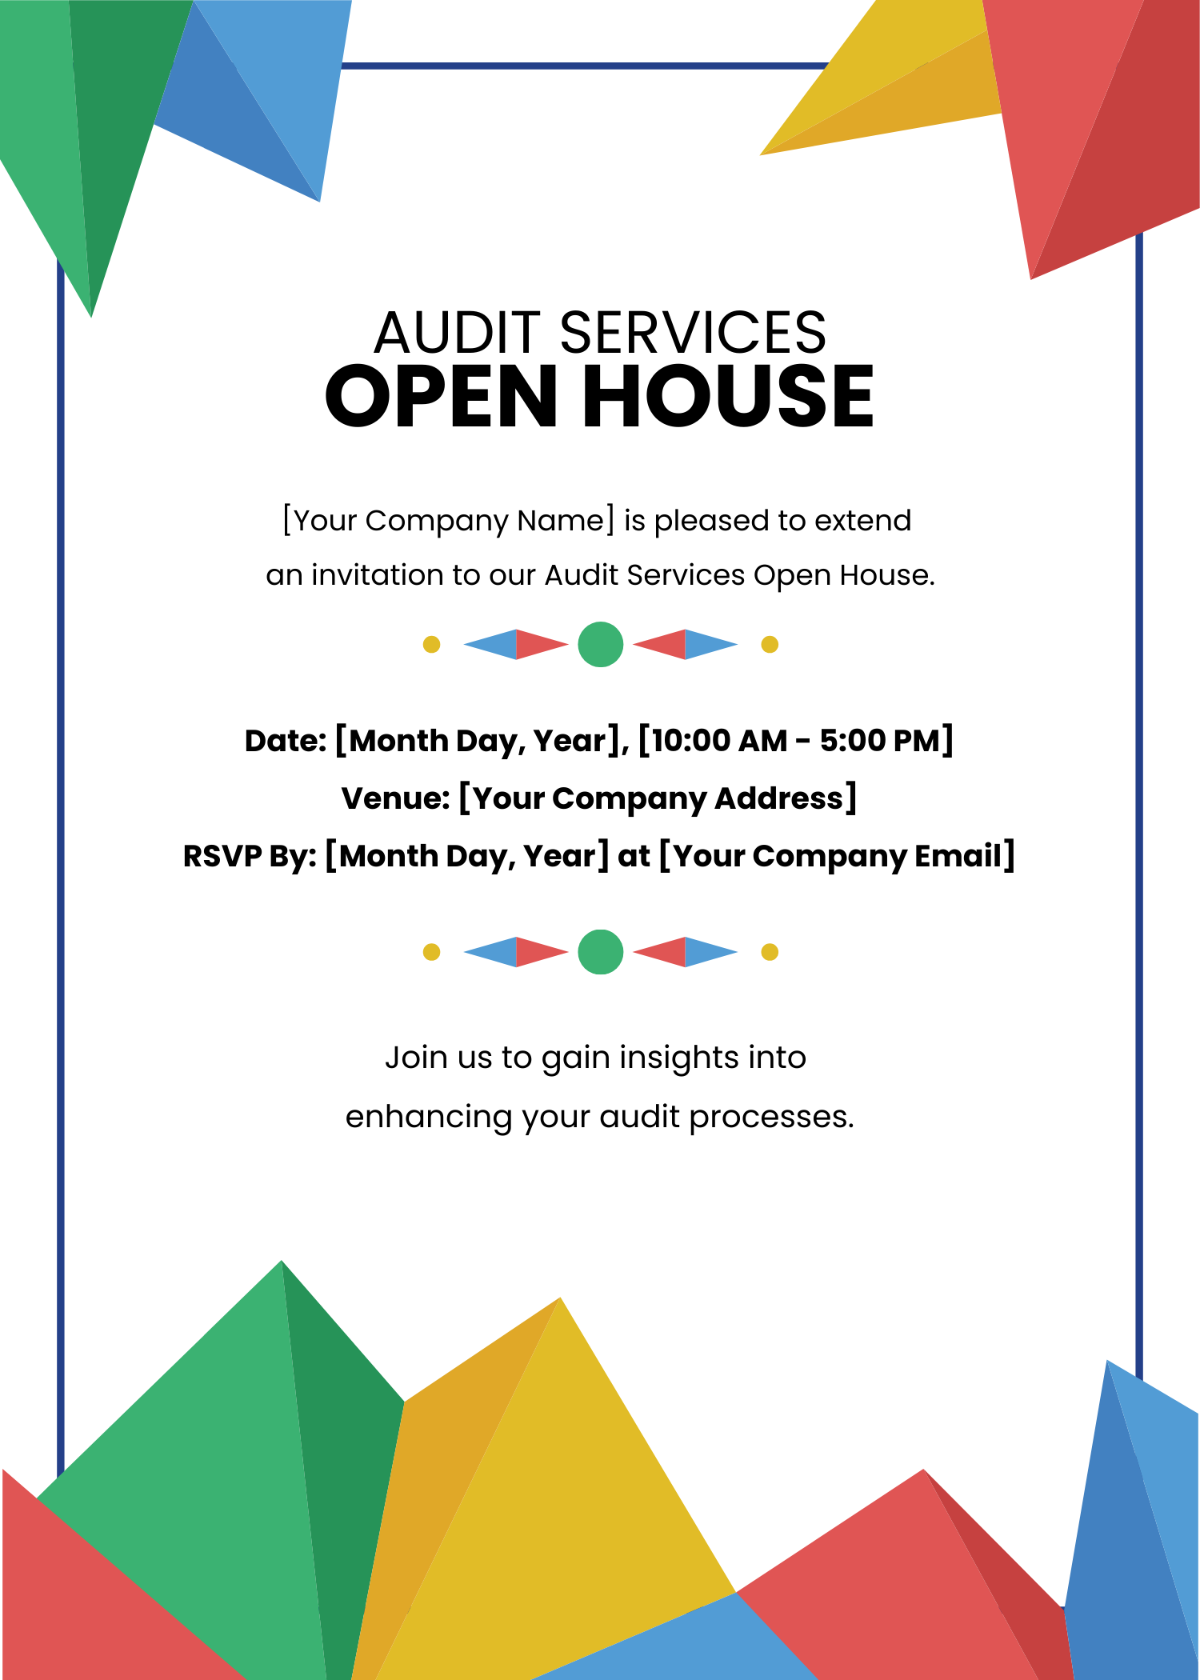 Audit Services Open House Invitation Card